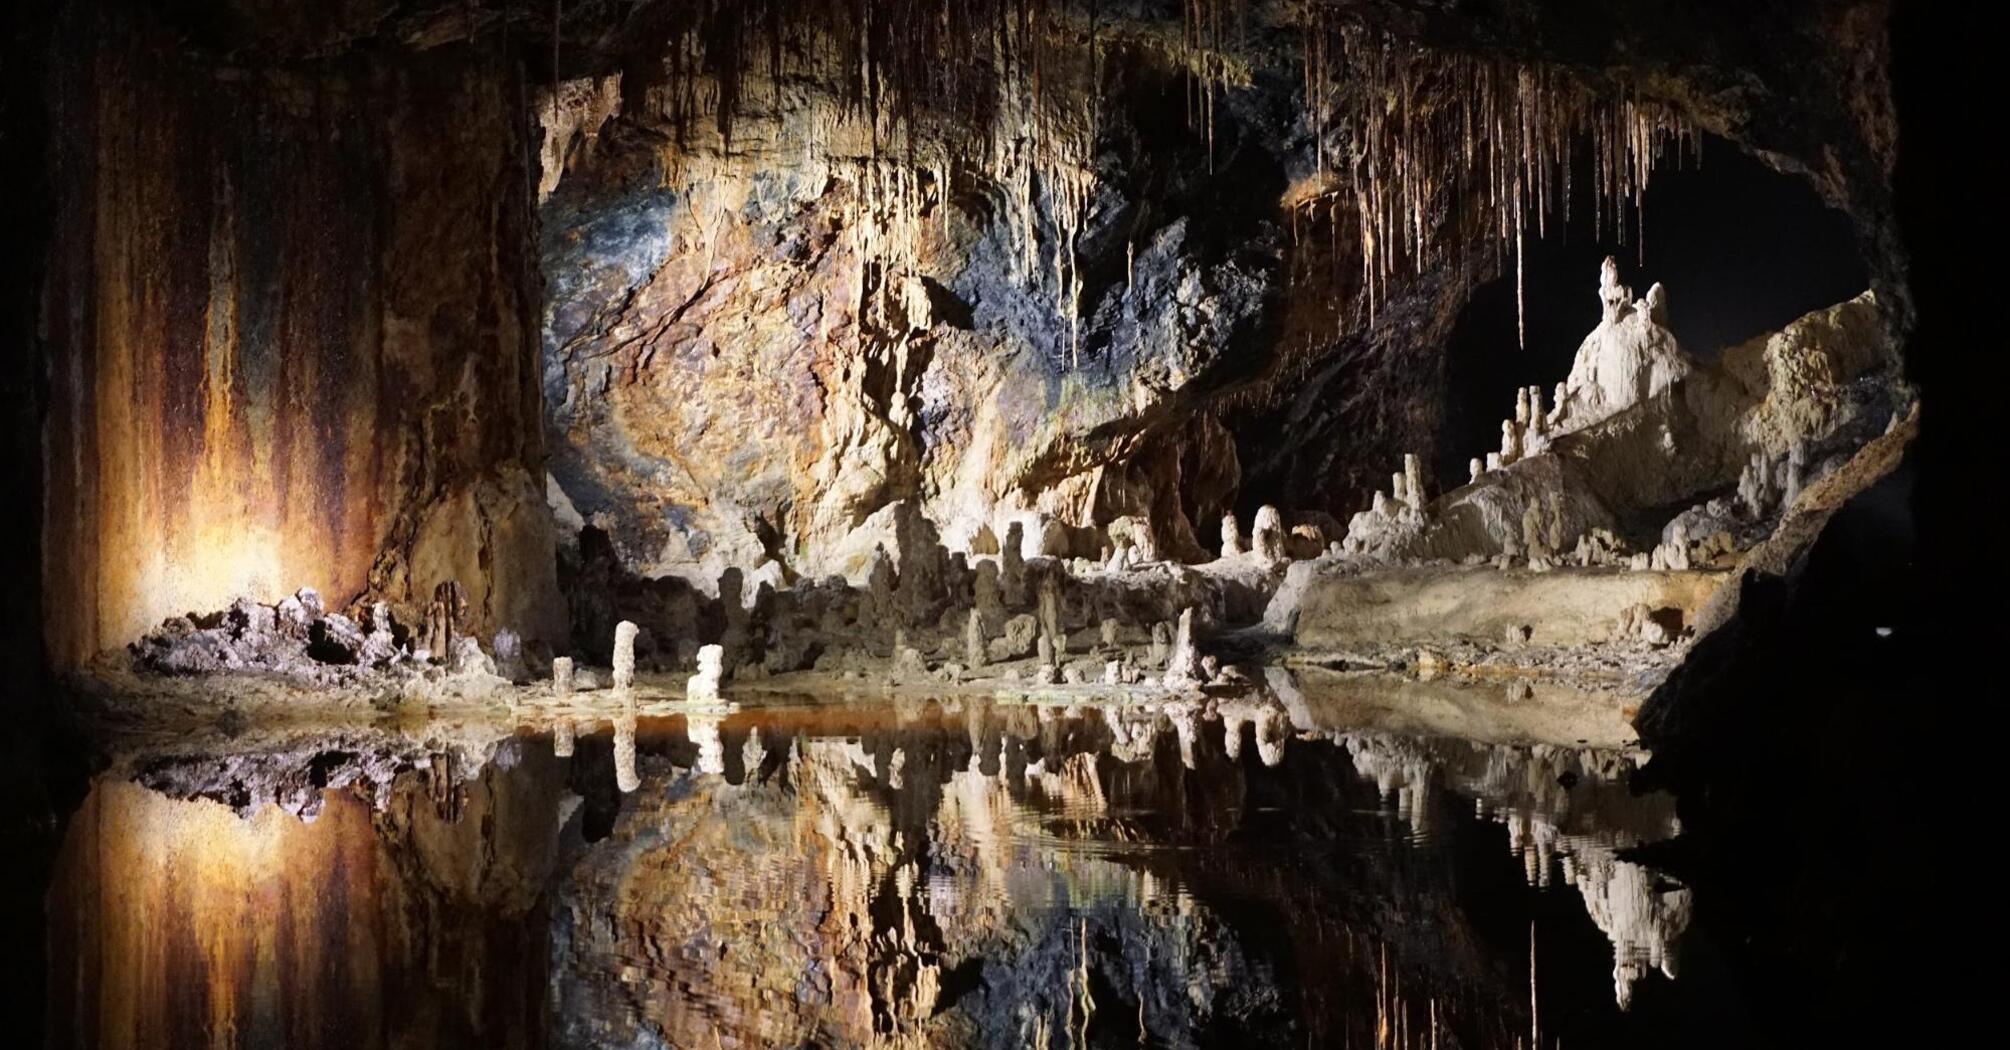 Cave reflections in still water